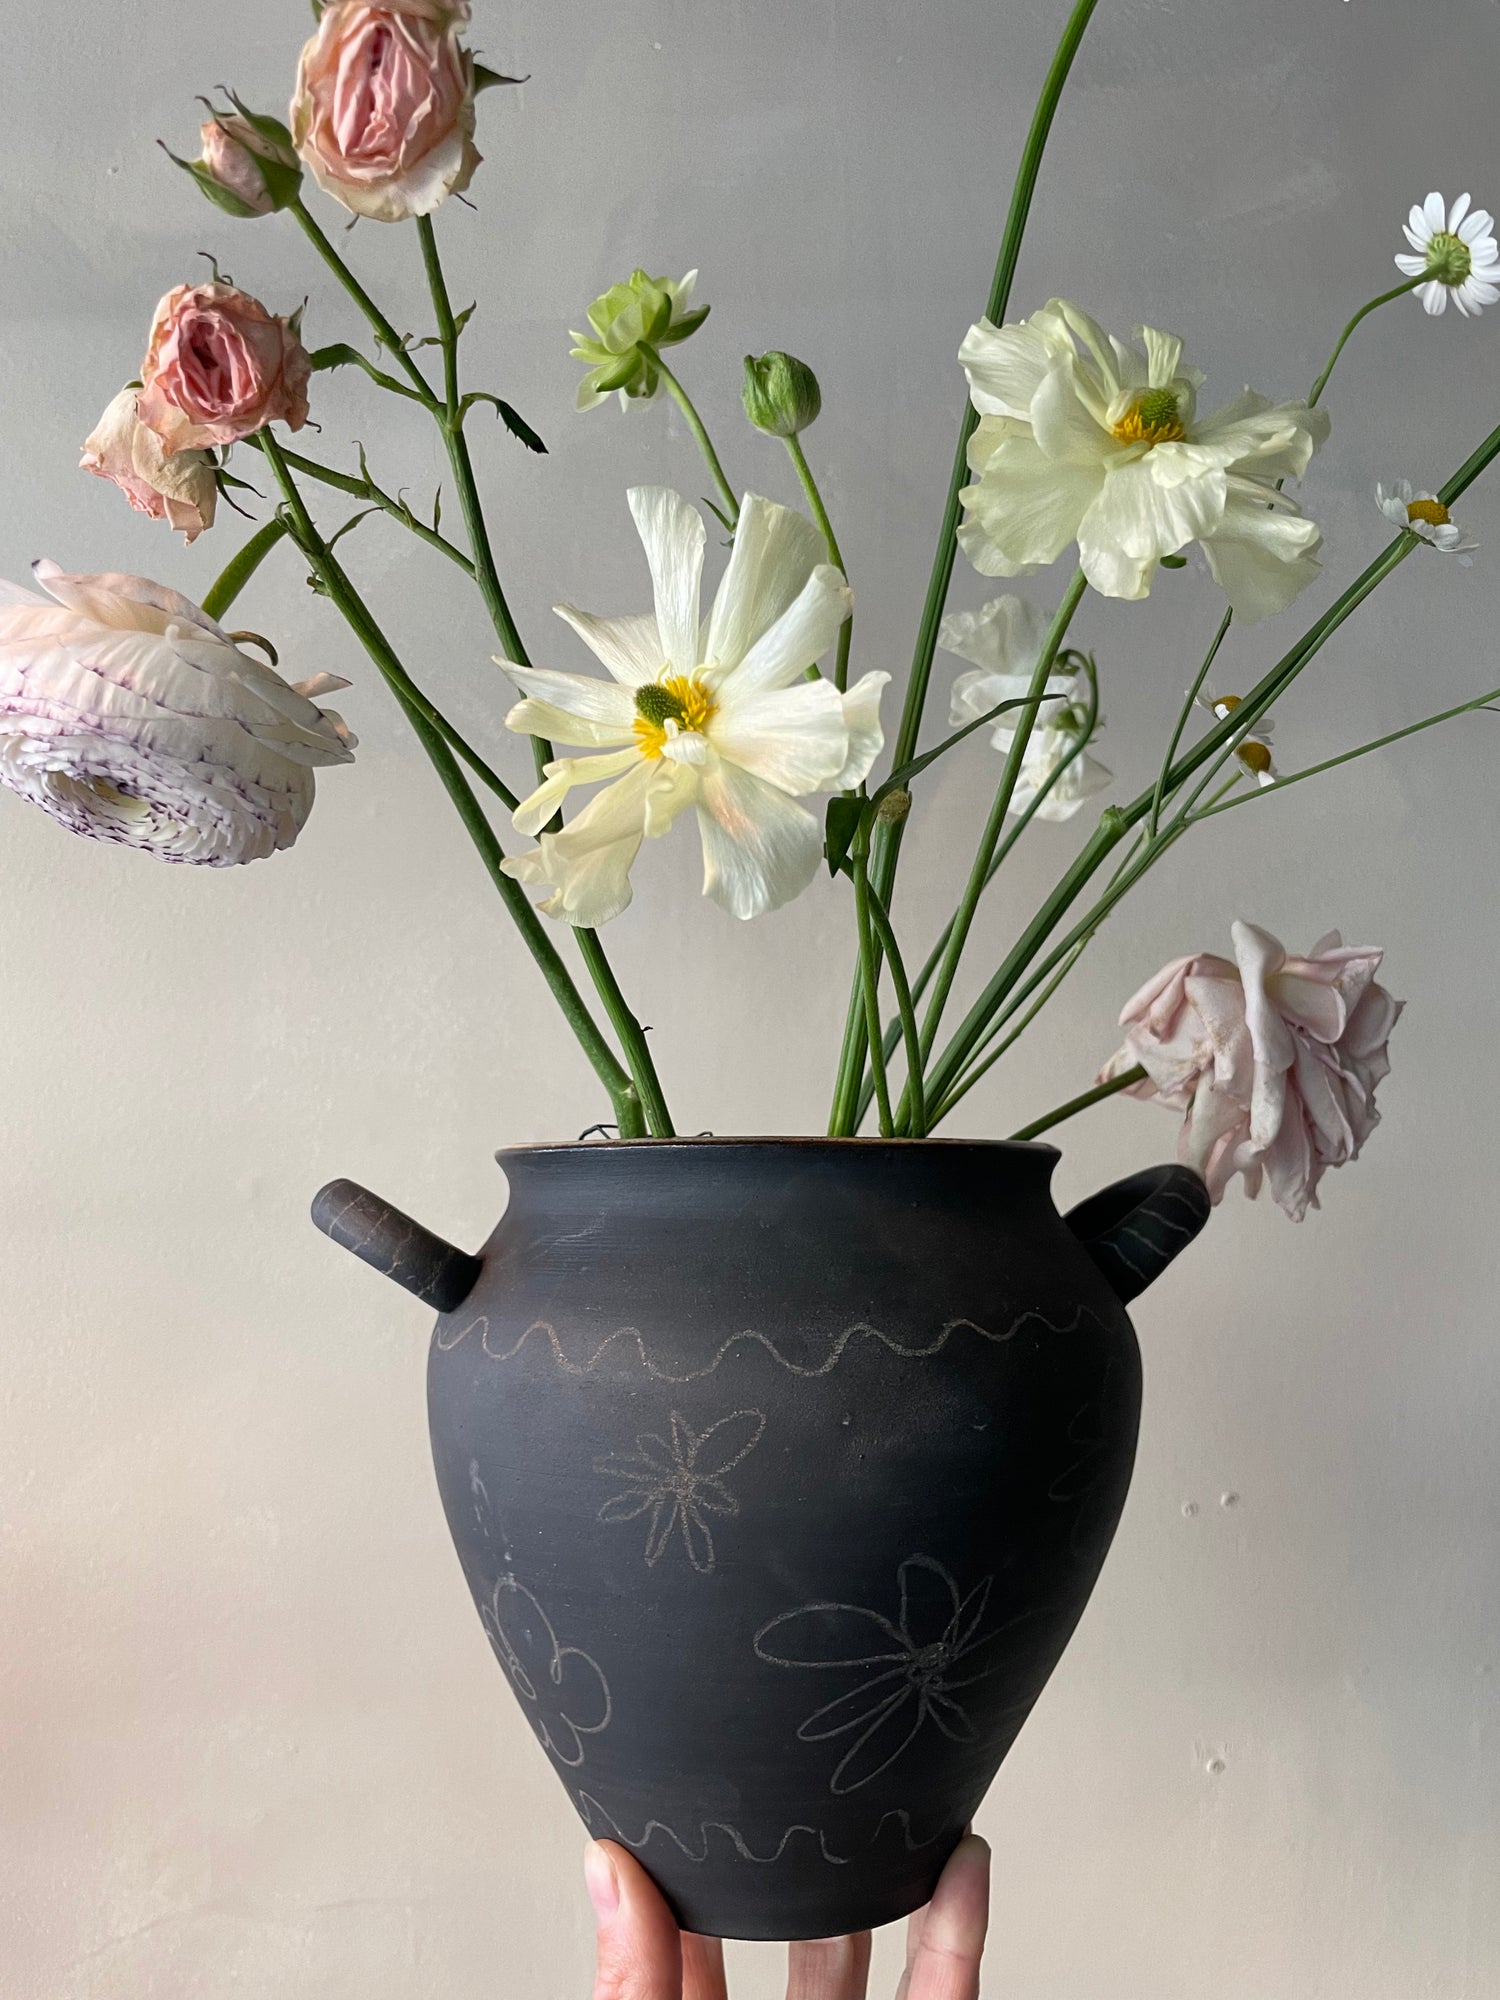 Vases for your Flowers